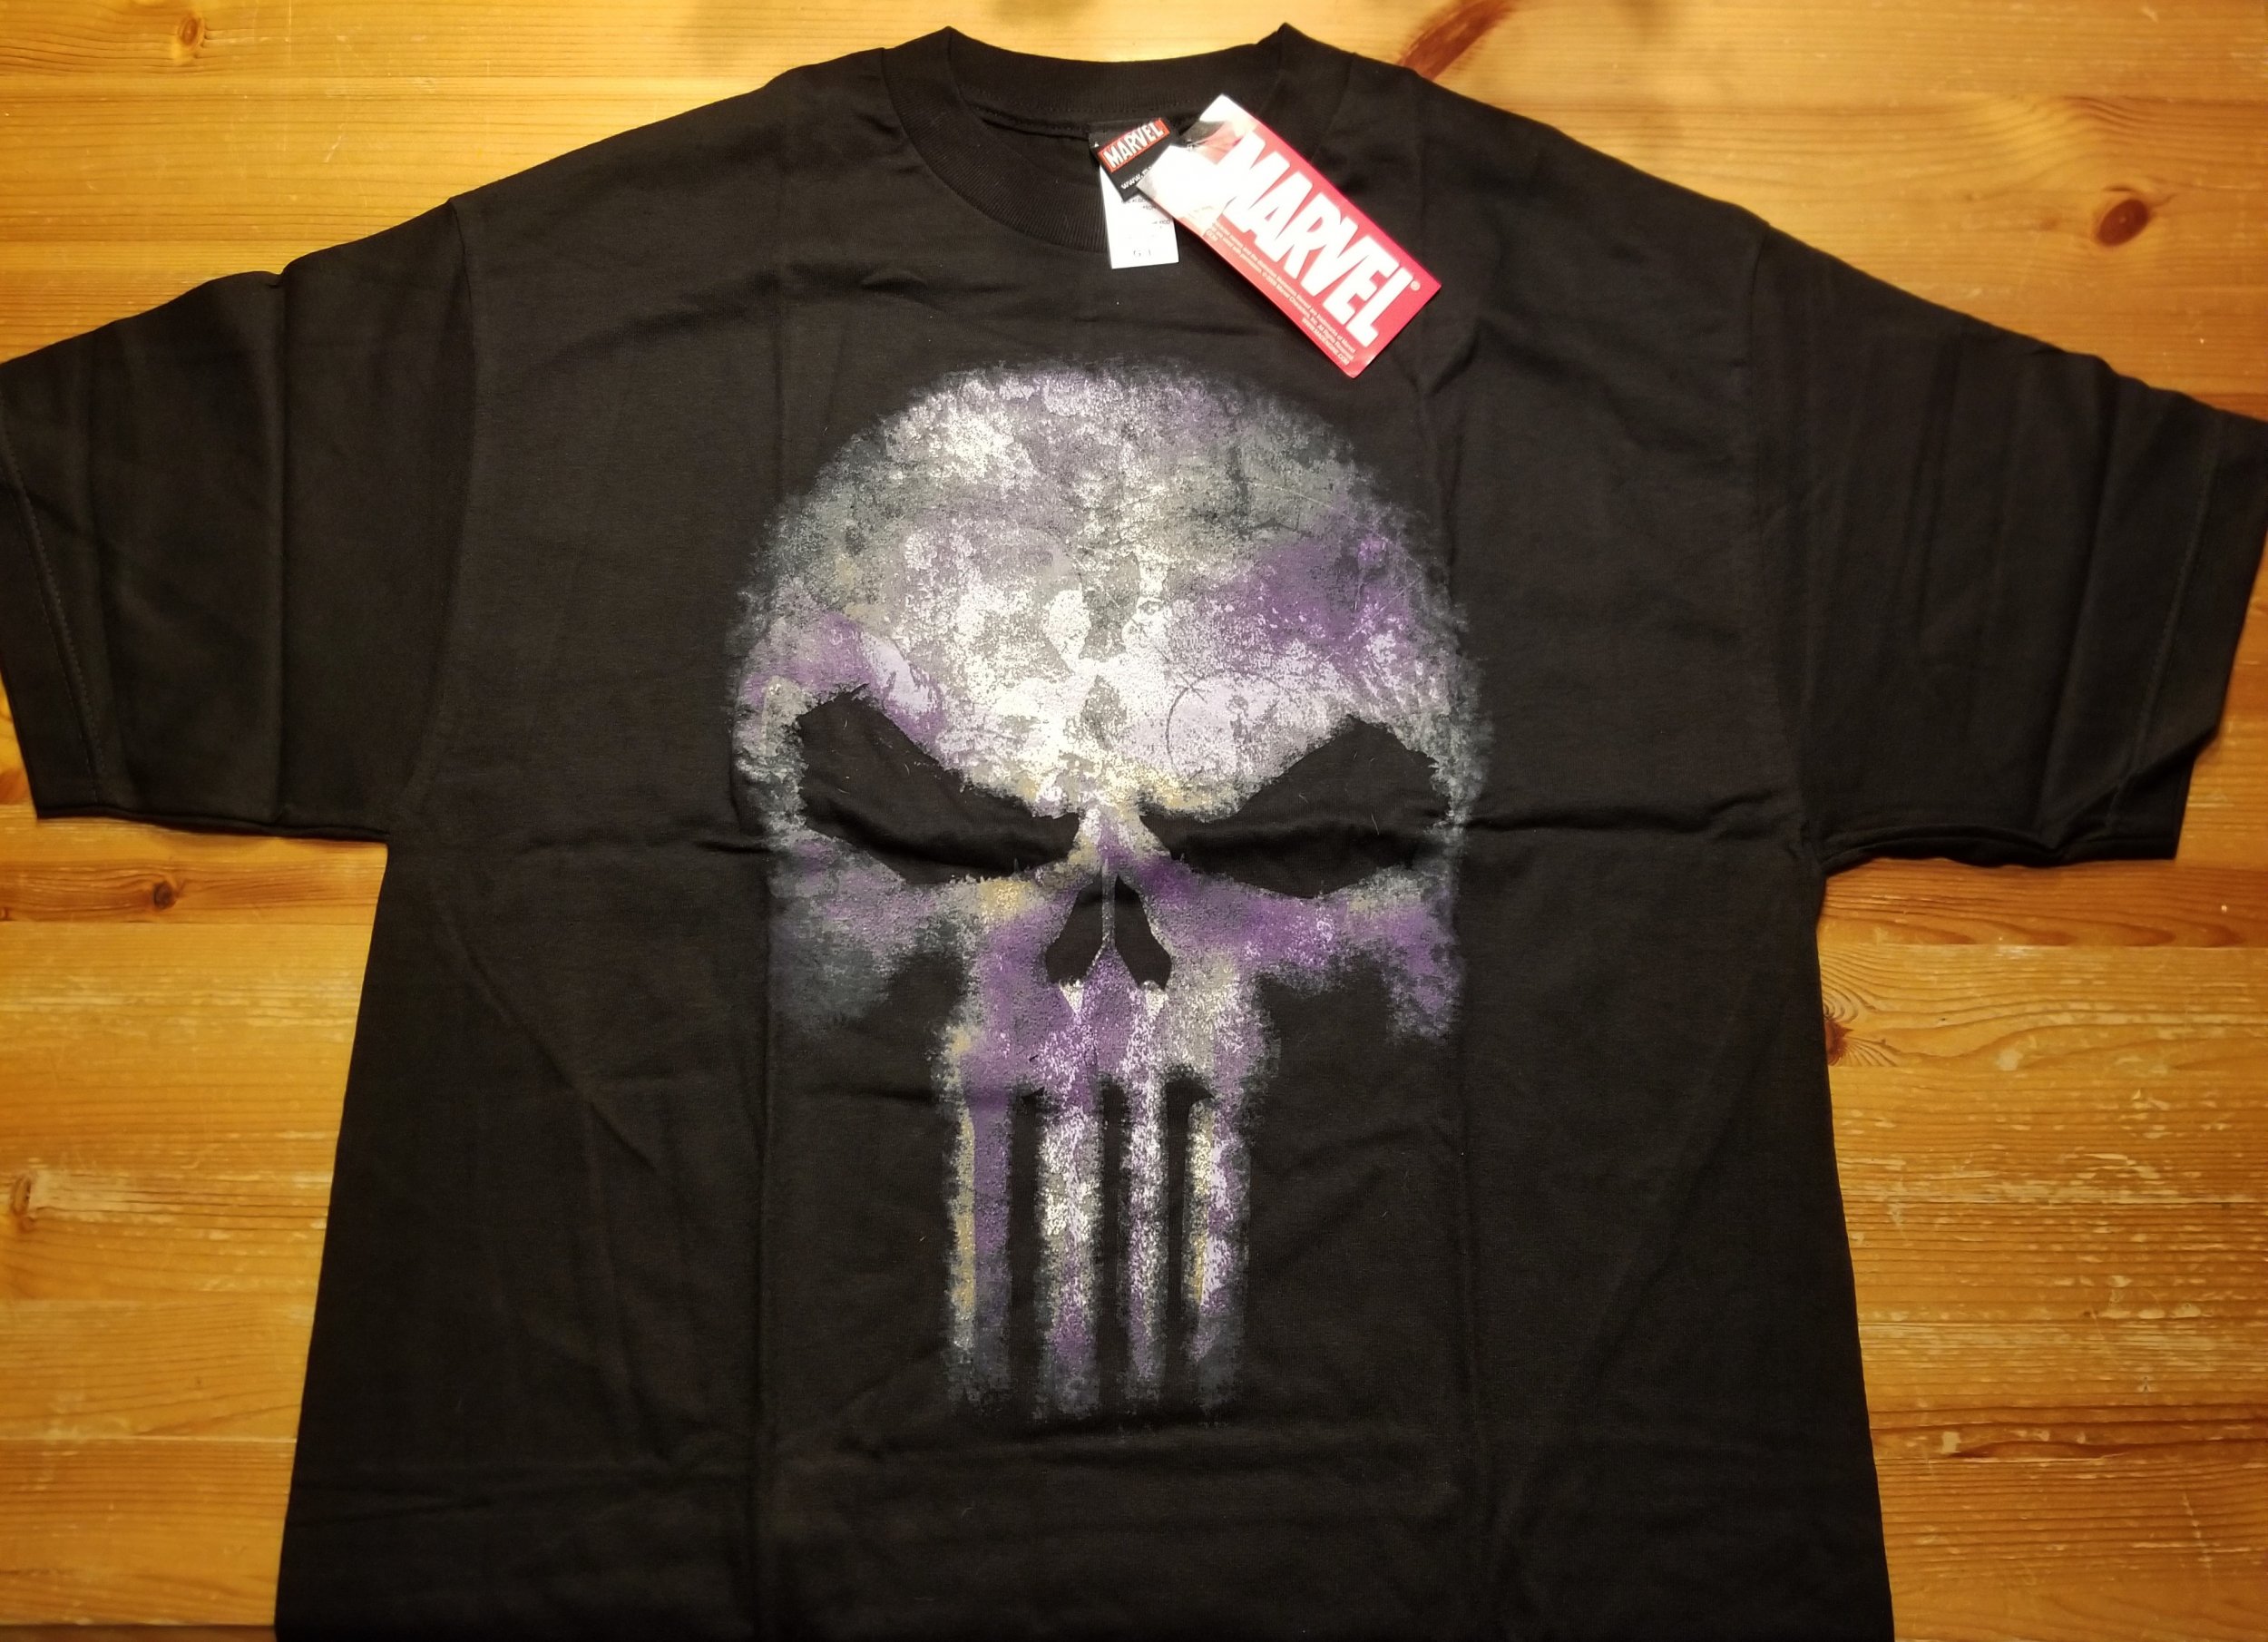 Tags Skull Marvel L & | T-Shirt Accessories - Apparel Purple HipComic Comic NOS w/ Collectibles / Punisher